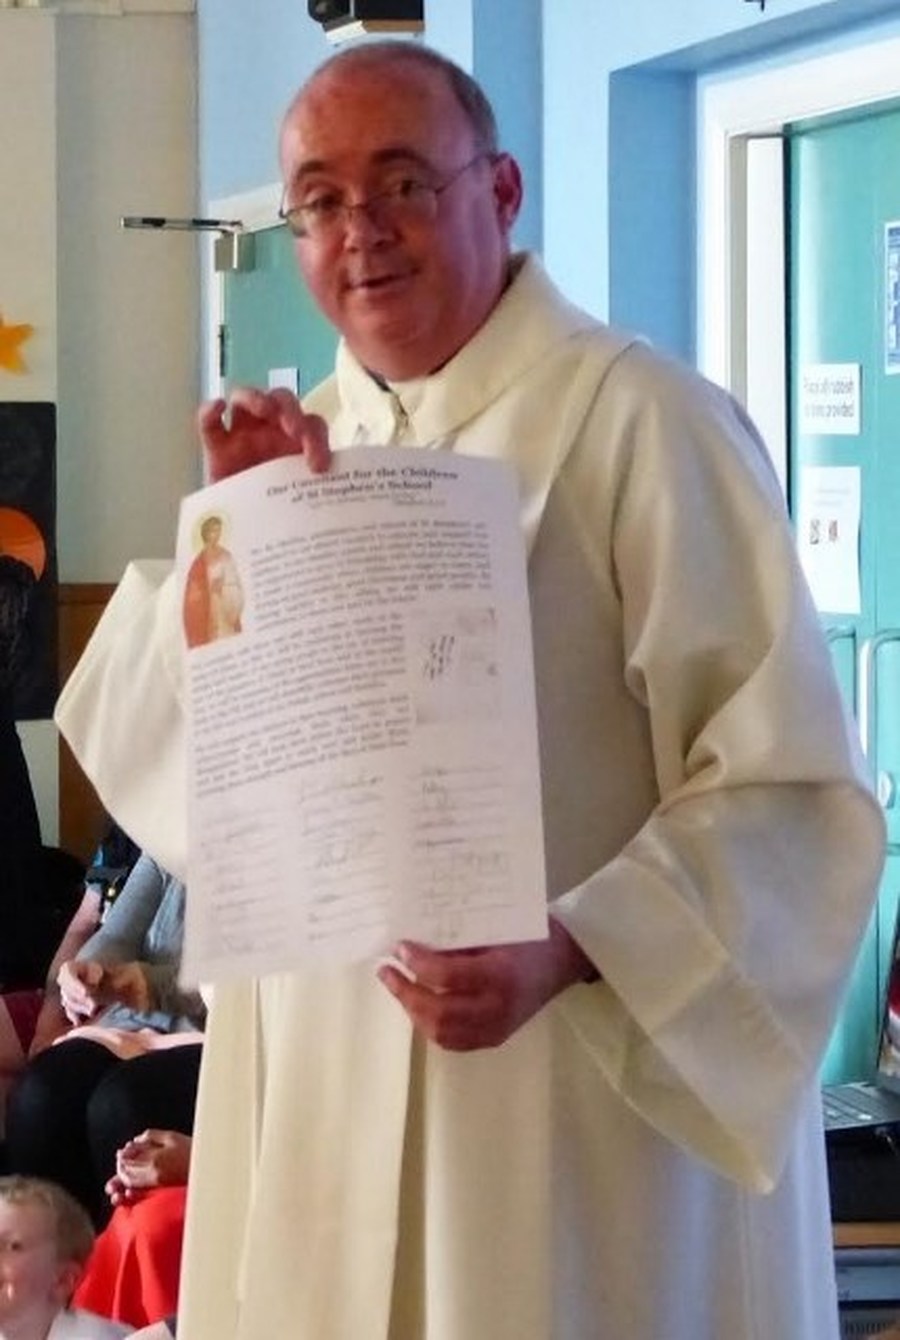 Fr. Andrew with the signed Covenant